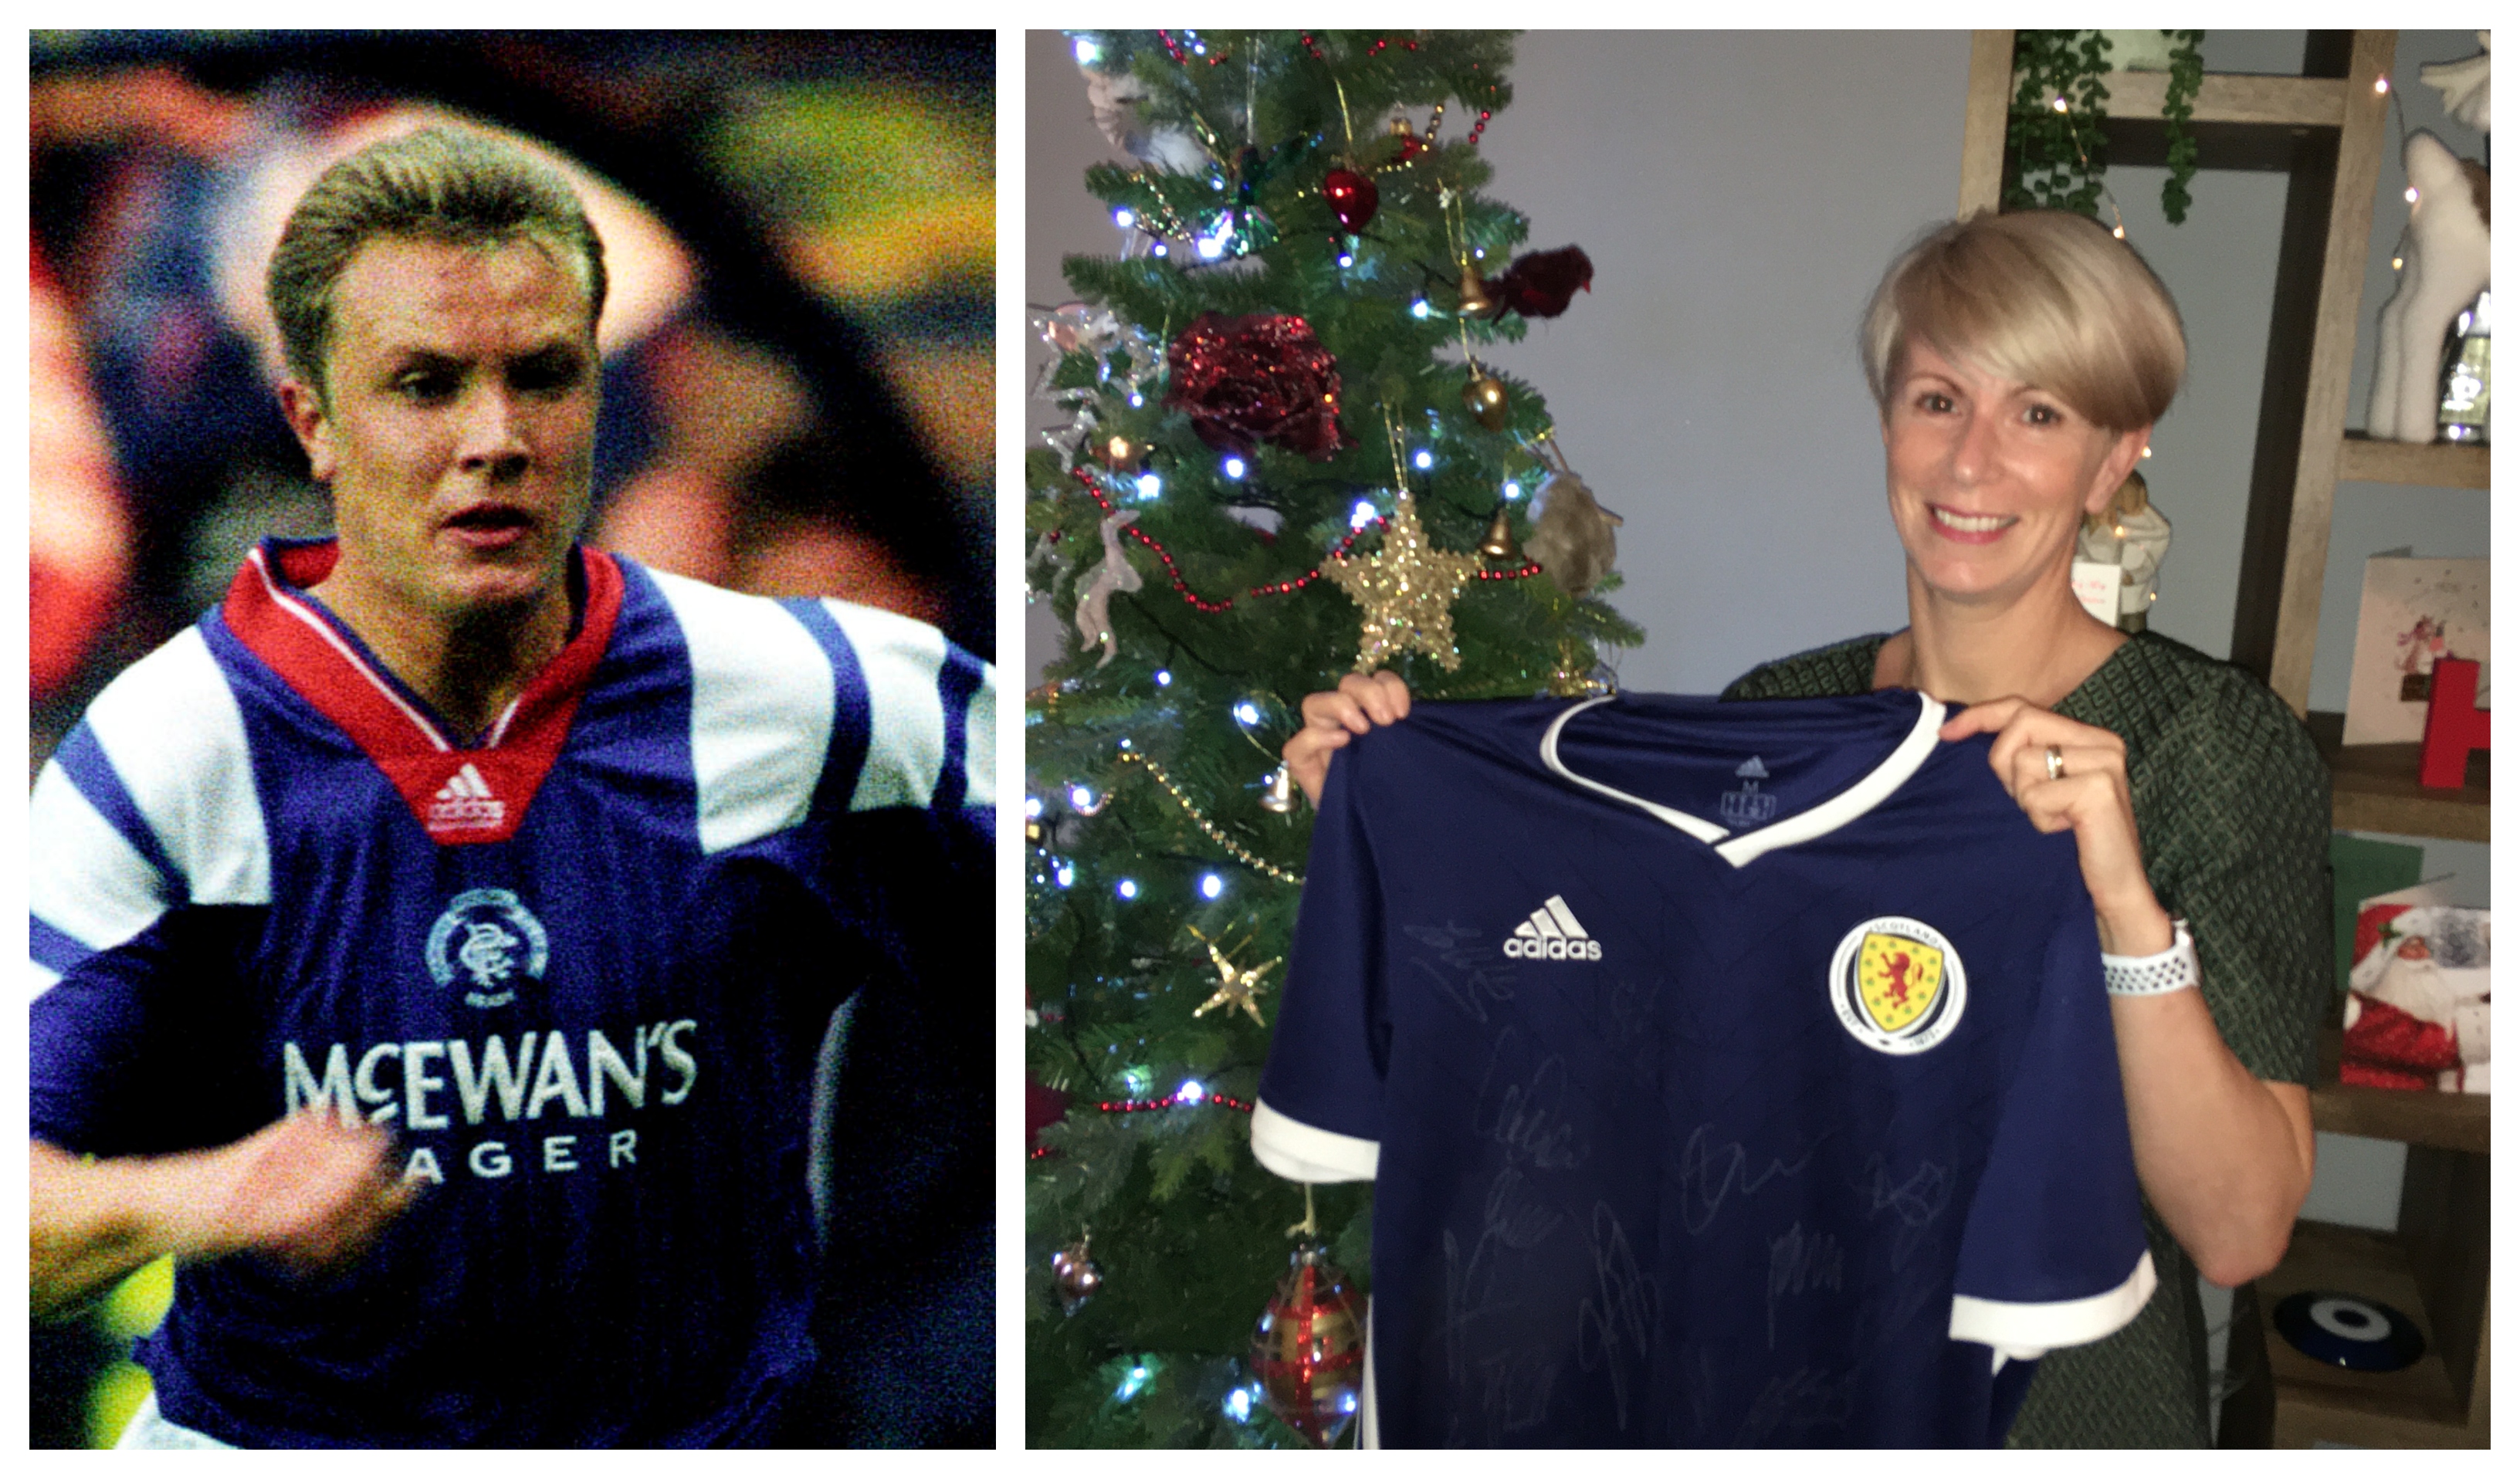 David Hagen’s sister, Kirstin Horner, shows off the signed Scotland top that will now take its place in his hospice room alongside the others from his club days, including a spell at Rangers